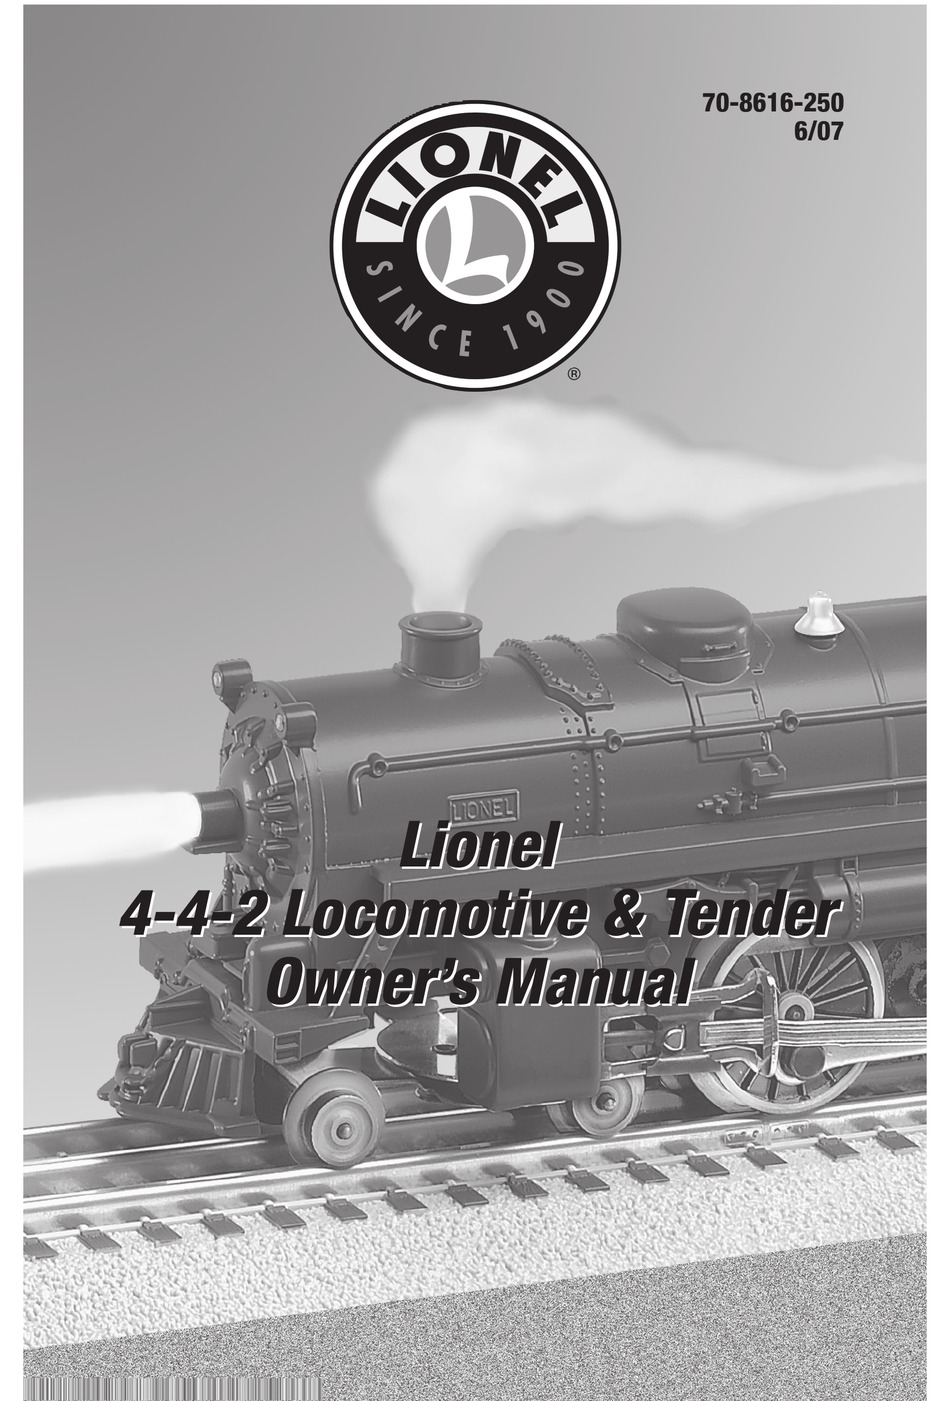 LIONEL 8206 SMOKE LOCOMOTIVE TIRE-TRACTION 8206T TENDER INSTRUCTIONS PHOTOCOPY 